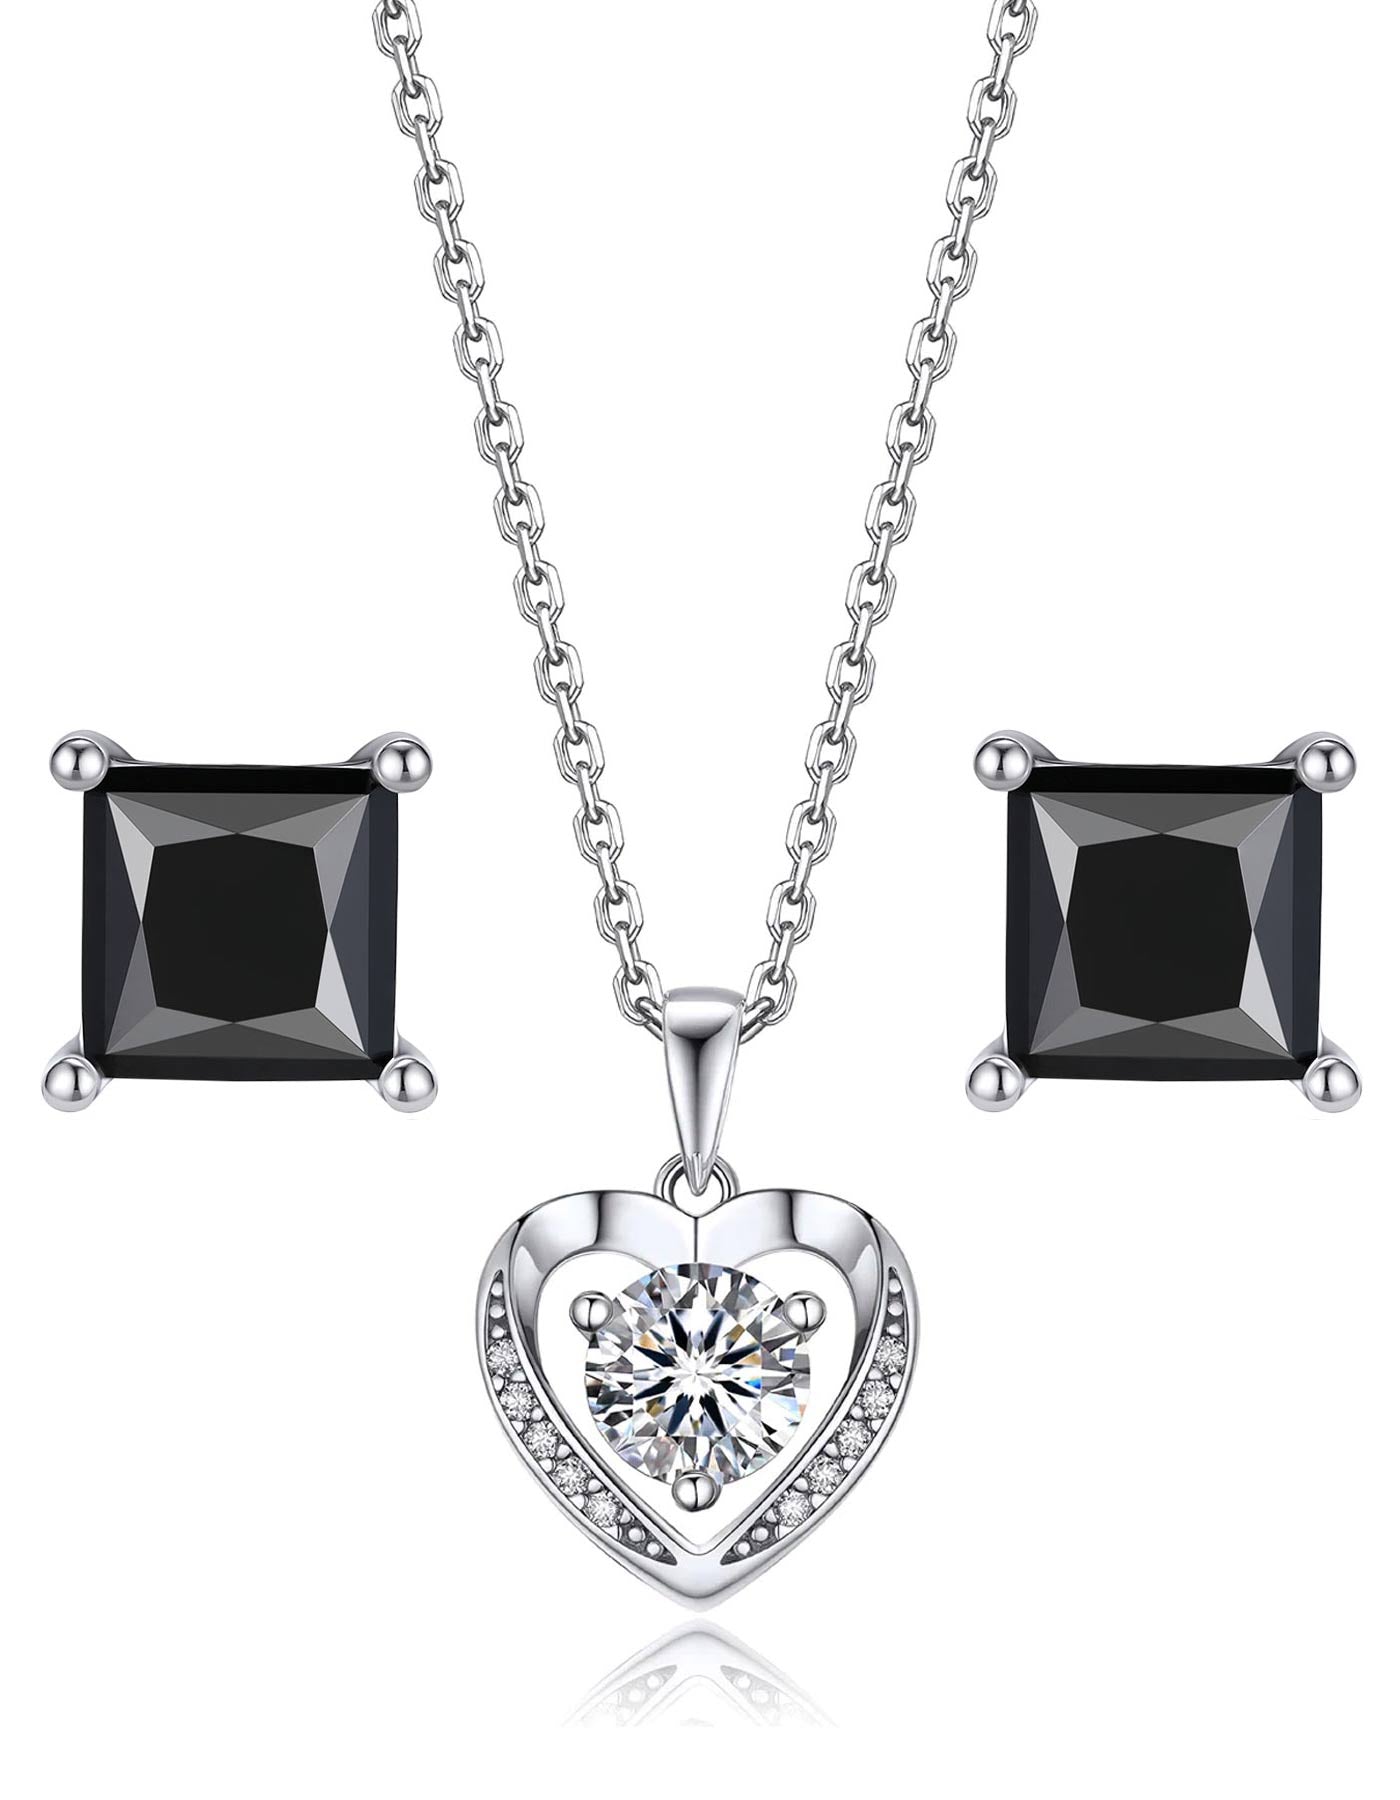 MomentWish Moissanite Heart Necklace and Black Princess Cut Earrings